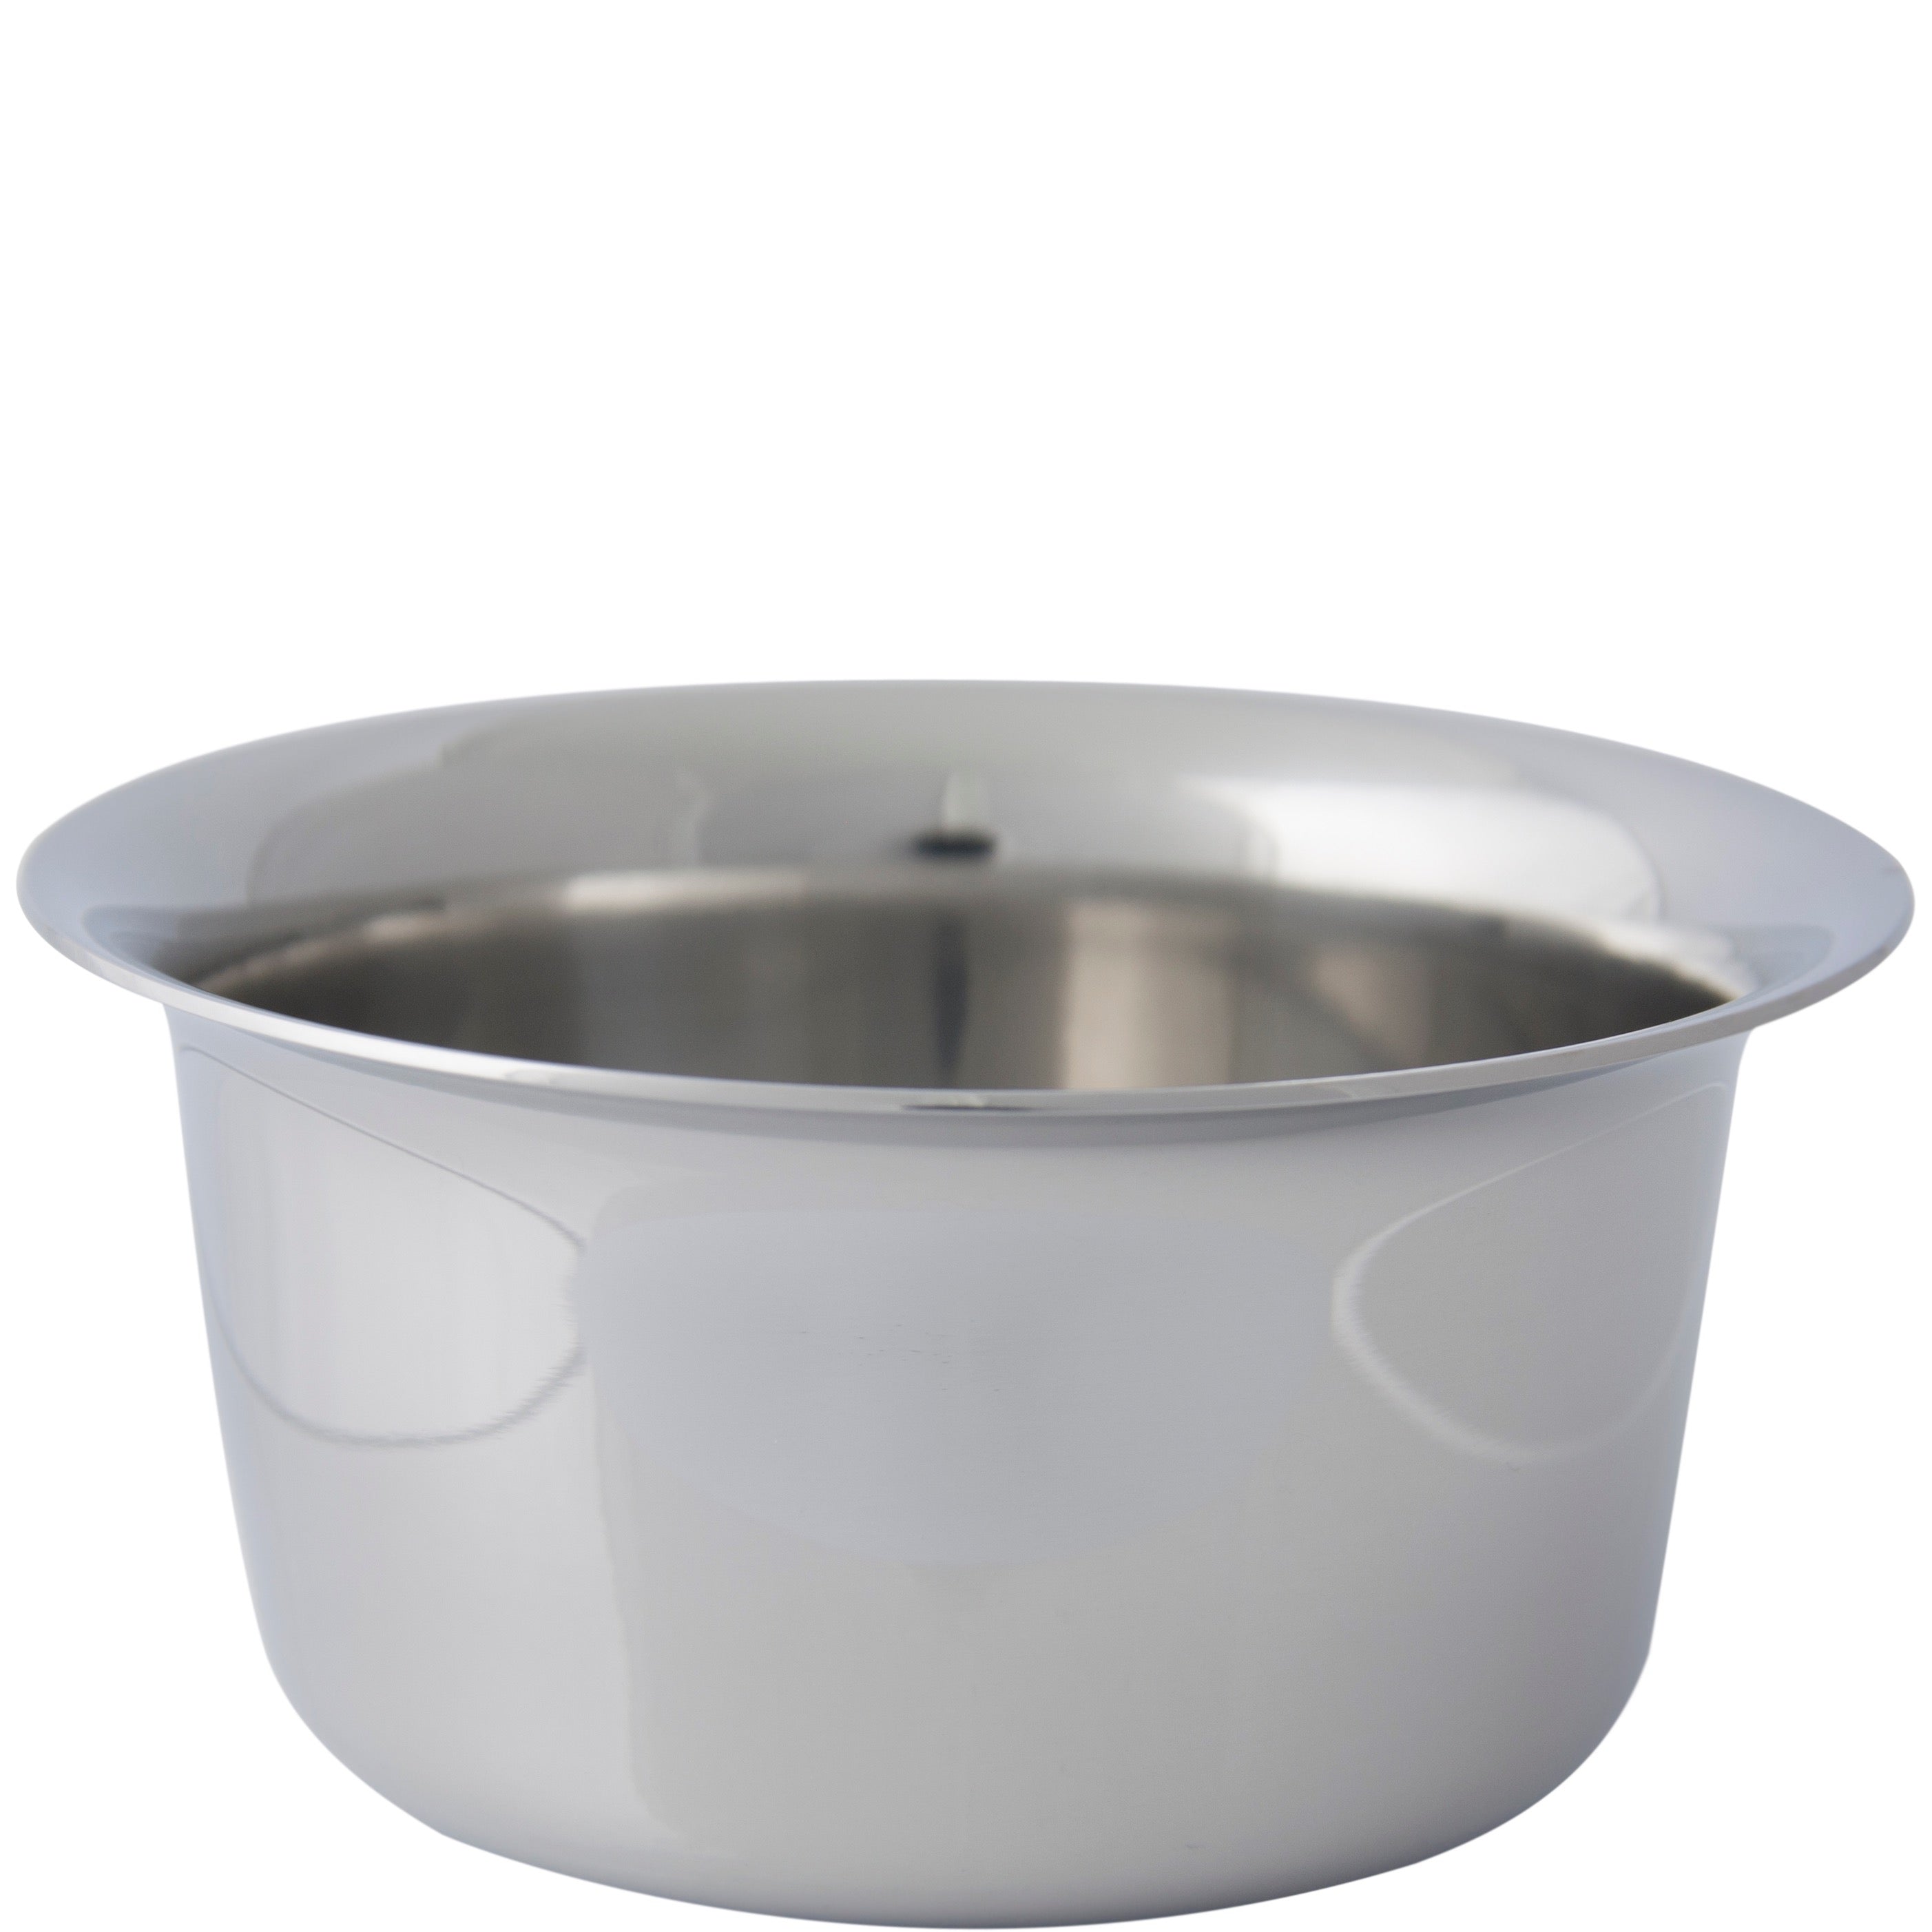 Shaving bowl or soap tray from stainless steel